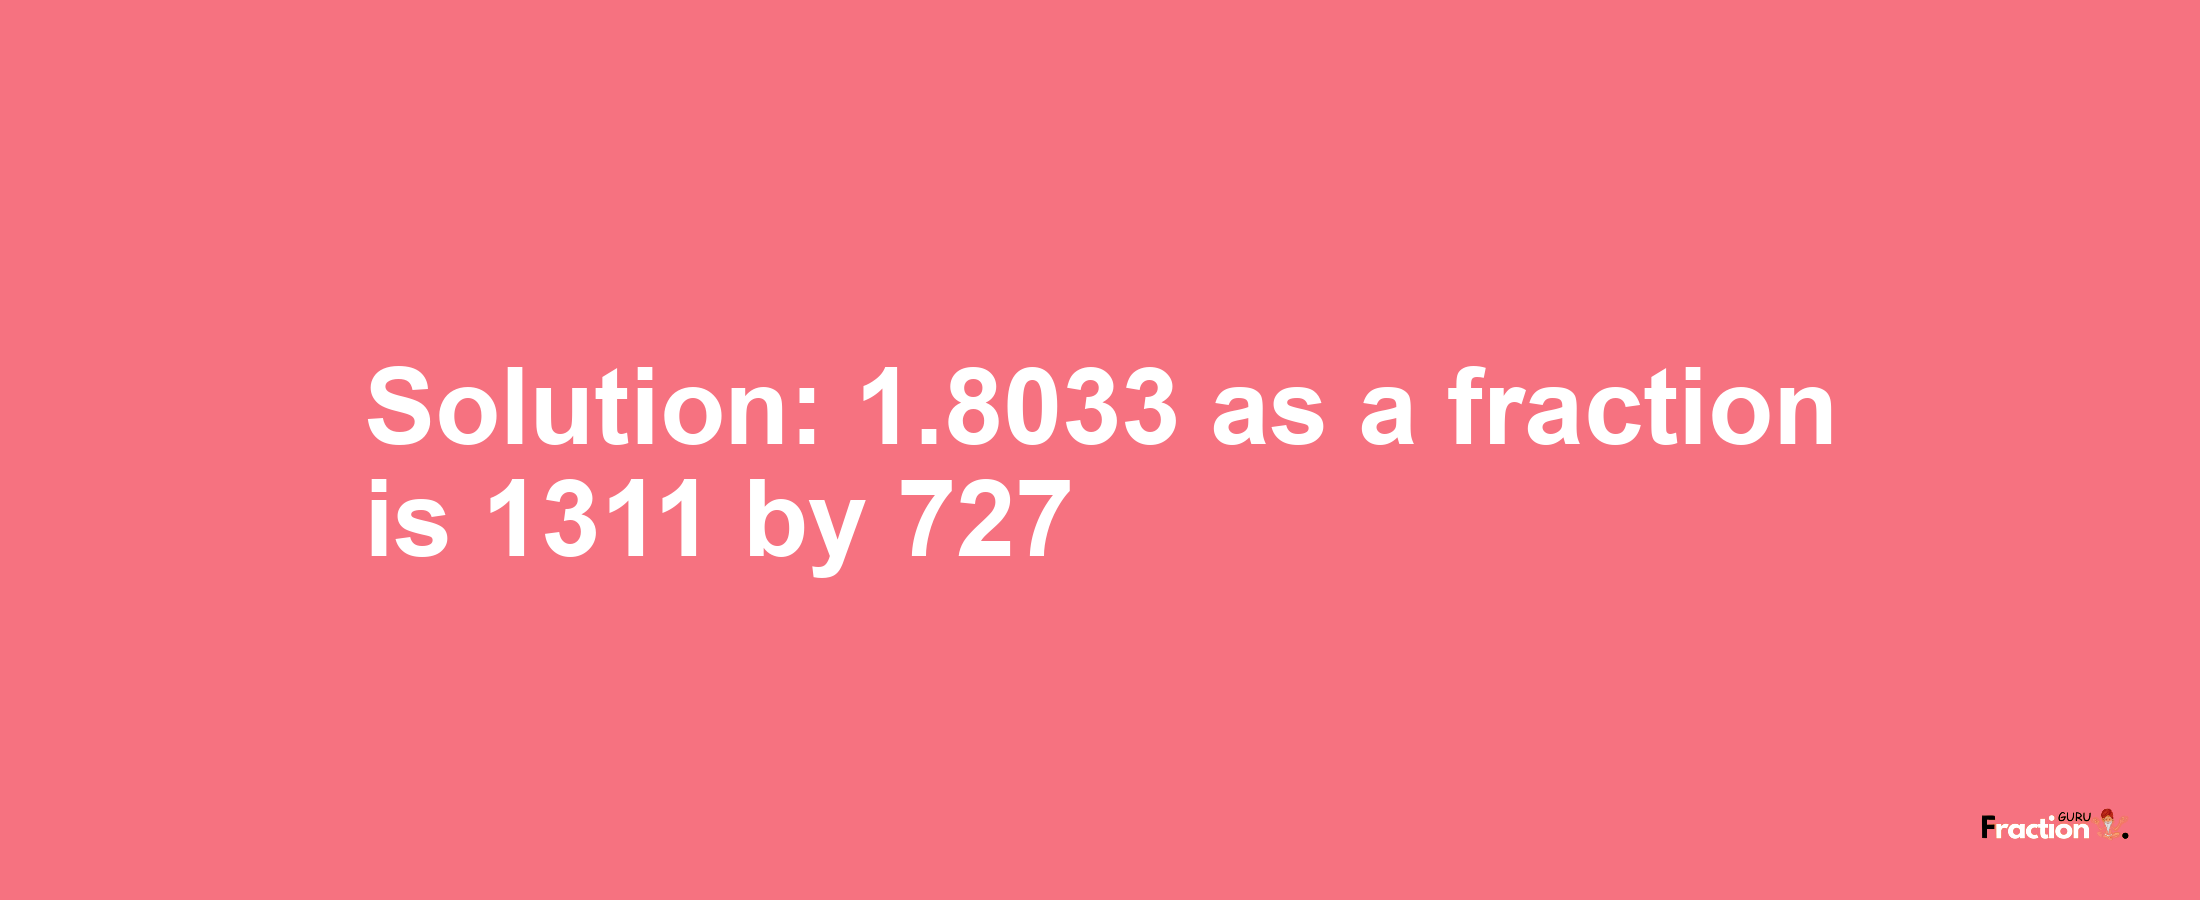 Solution:1.8033 as a fraction is 1311/727